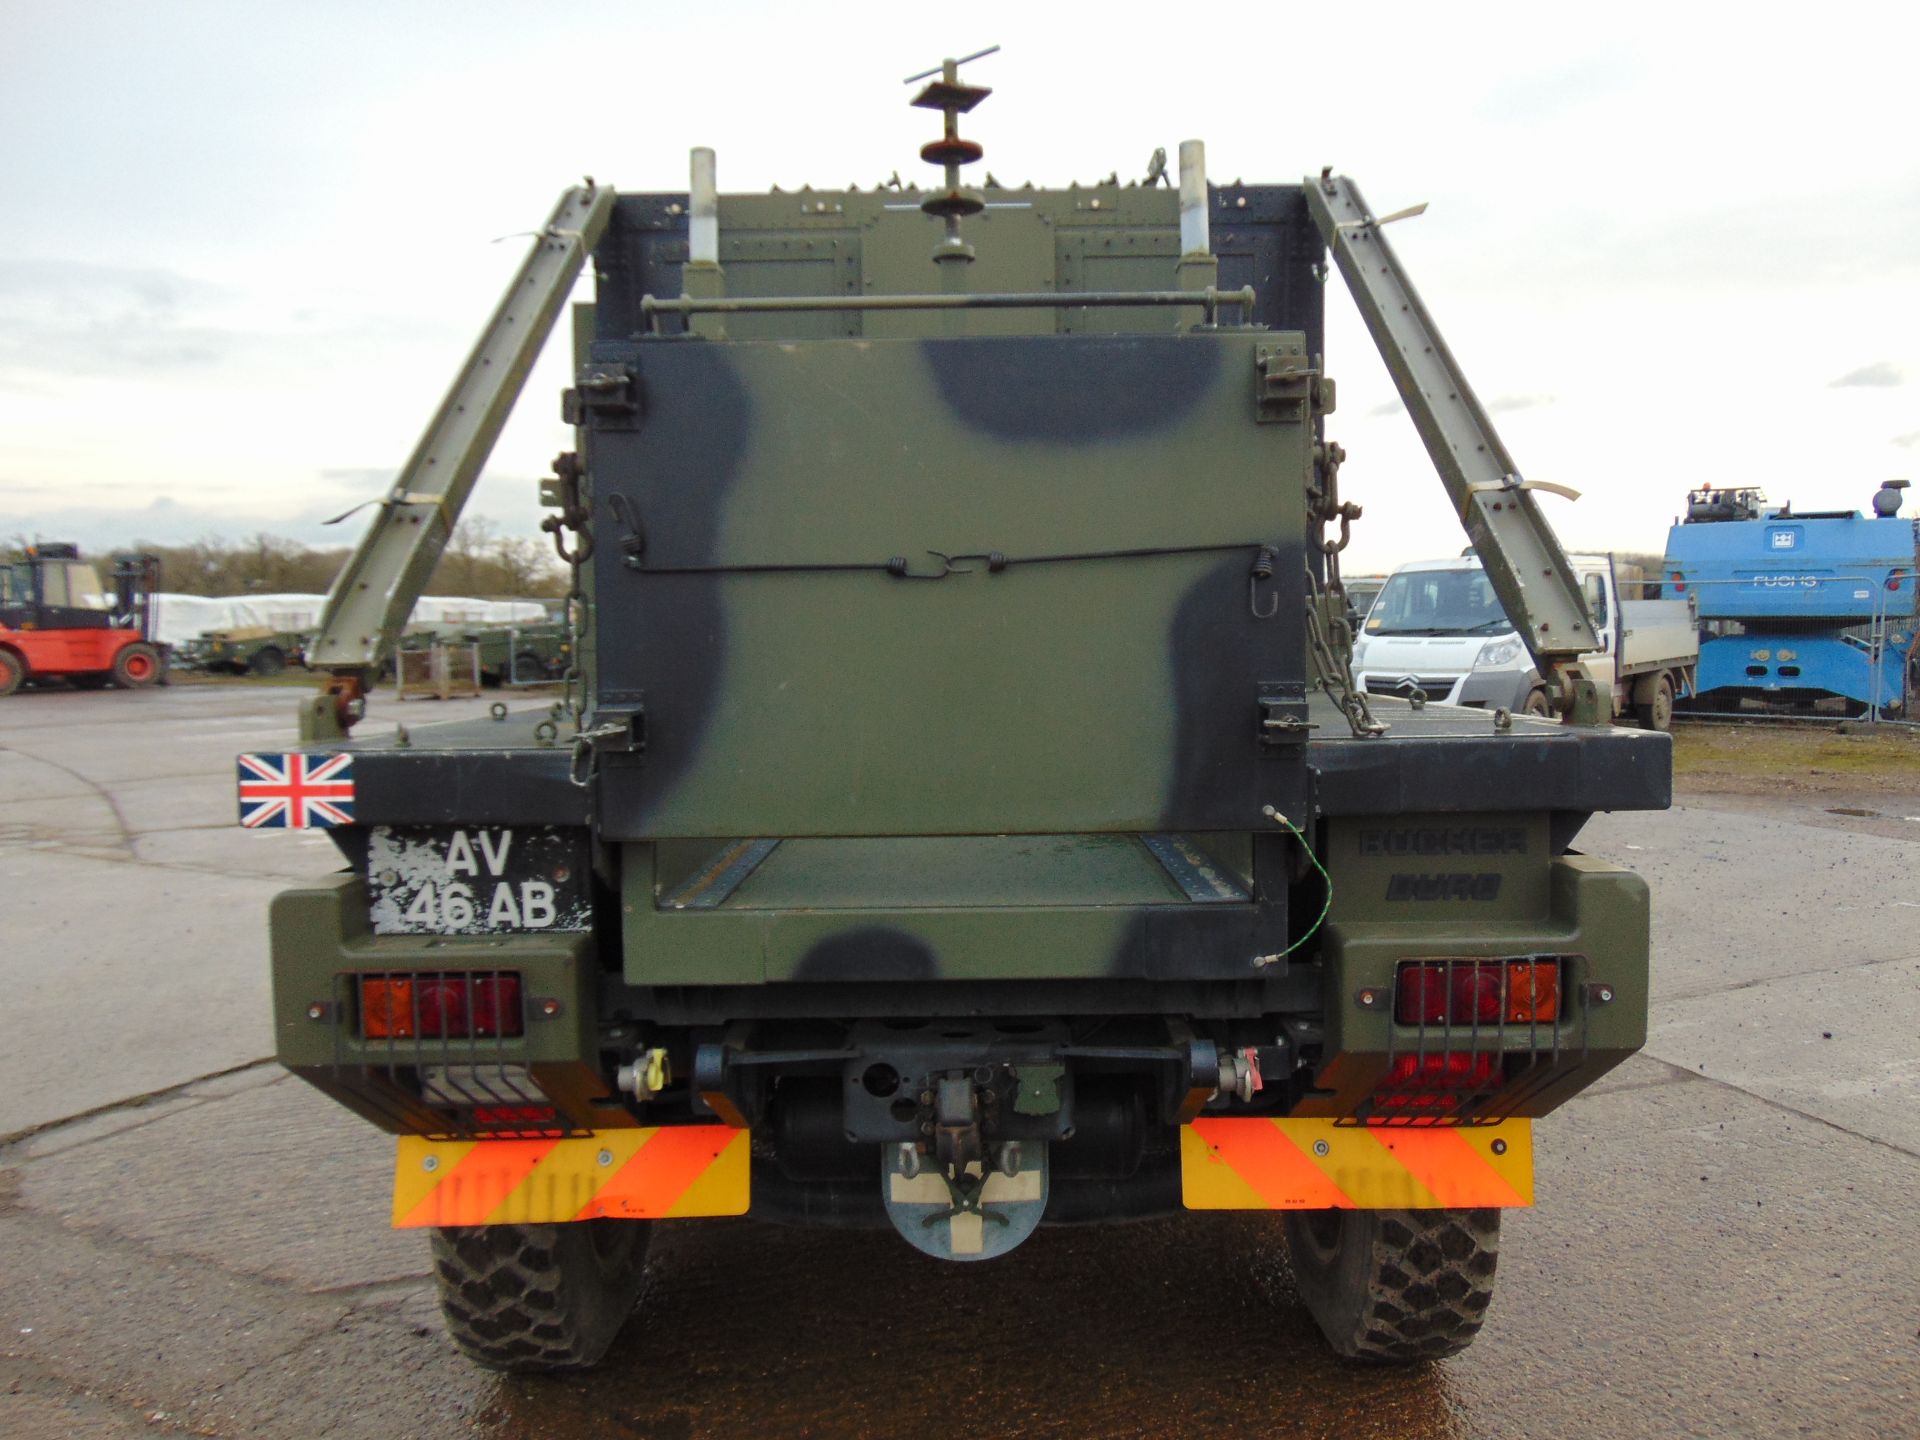 Ex Reserve Left Hand Drive Mowag Bucher Duro II 6x6 High-Mobility Tactical Vehicle - Image 7 of 16